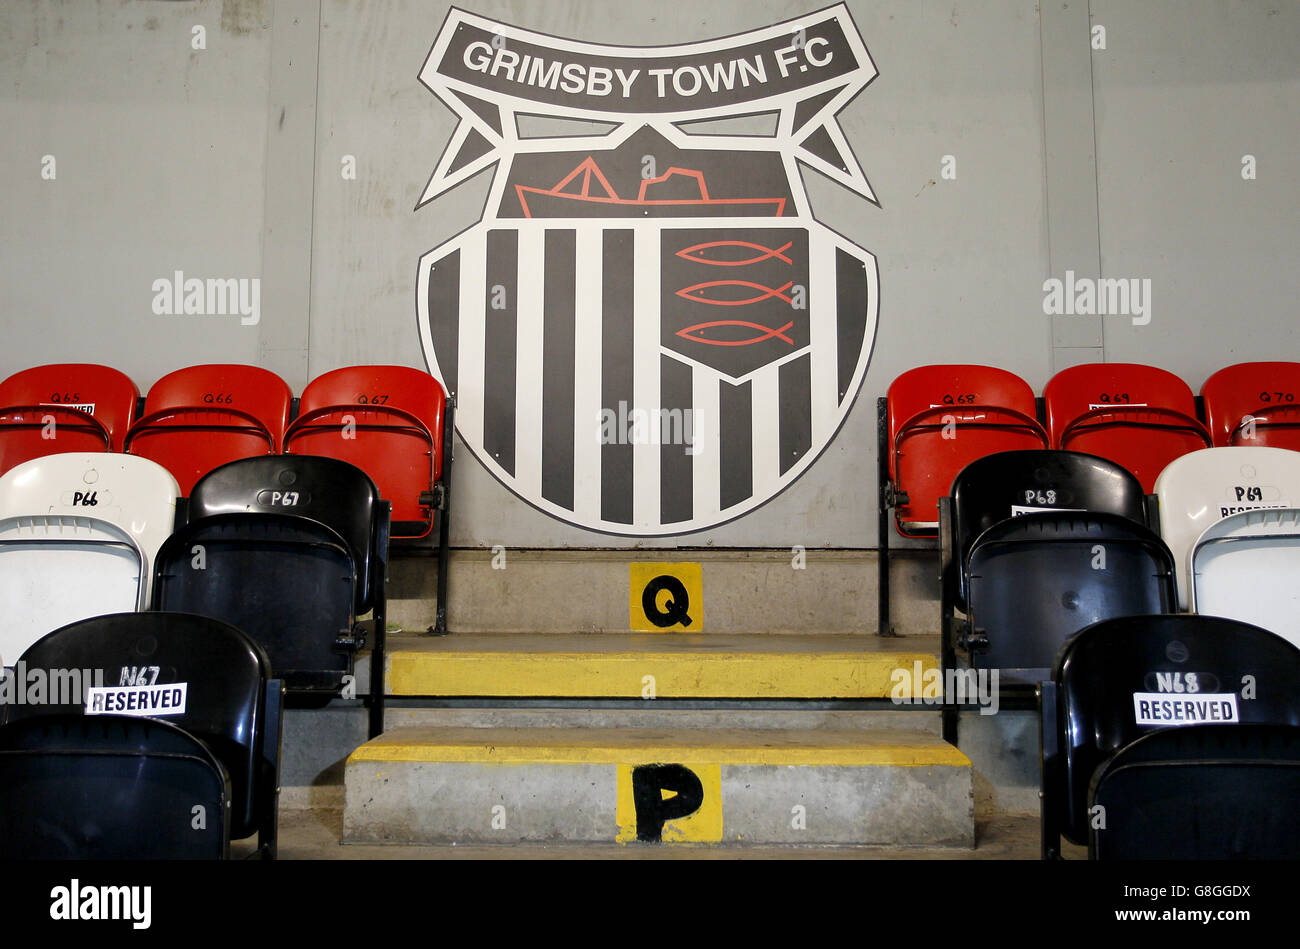 Grimsby Town v Shrewsbury Town - Emirates FA Cup - Second Round - Blundell Park. A general view of the club crest on the wall of the stands at Blundell Park, Grimsby Town Stock Photo